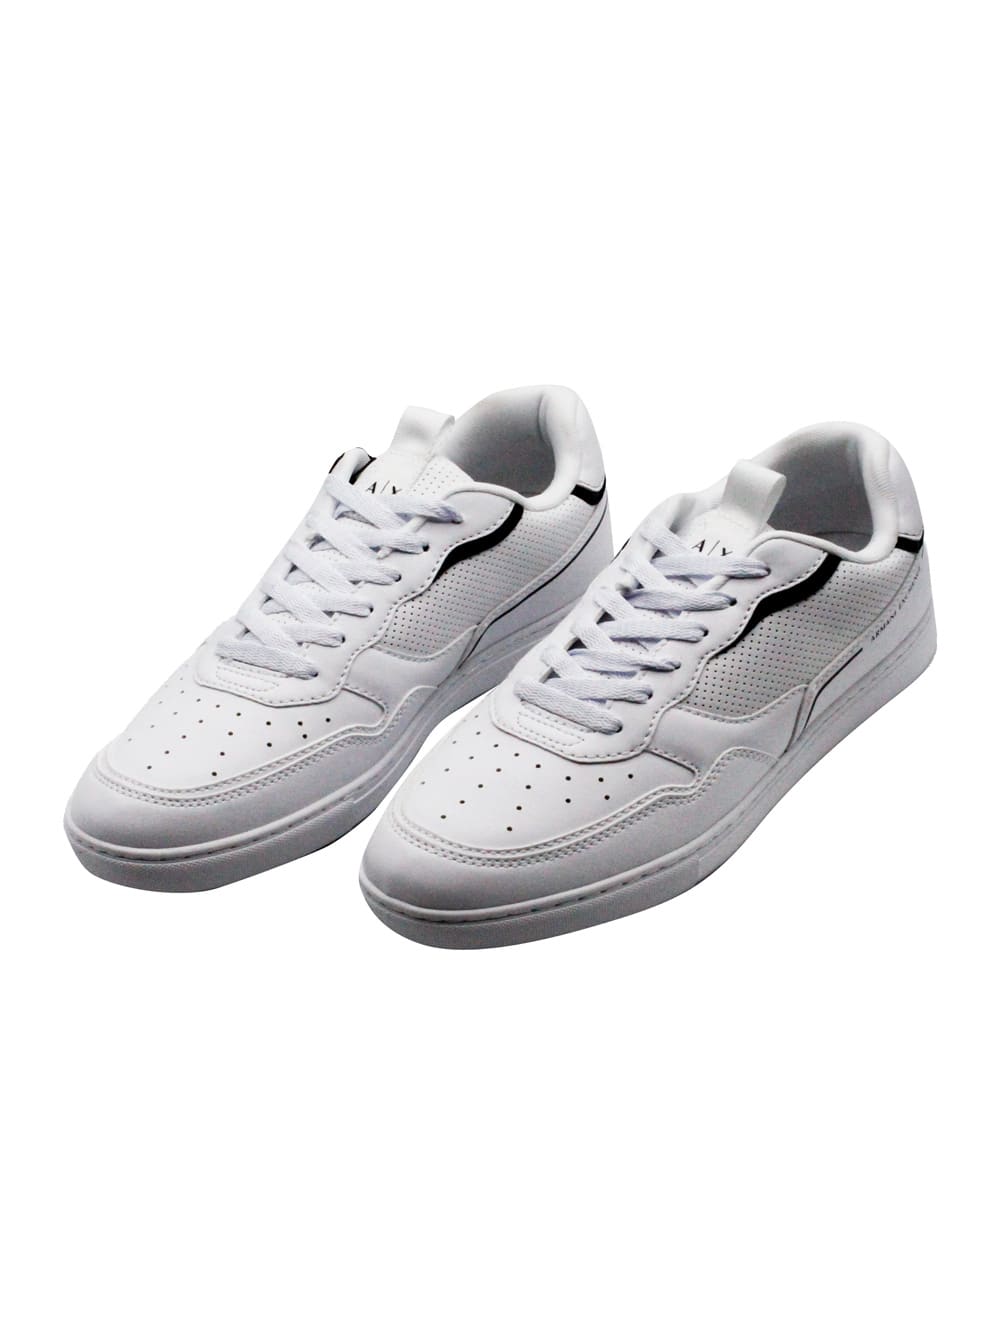 Shop Armani Collezioni Sneakers In Soft Perforated Leather With Matching Sole And Lace Closure. Rear Logo In White